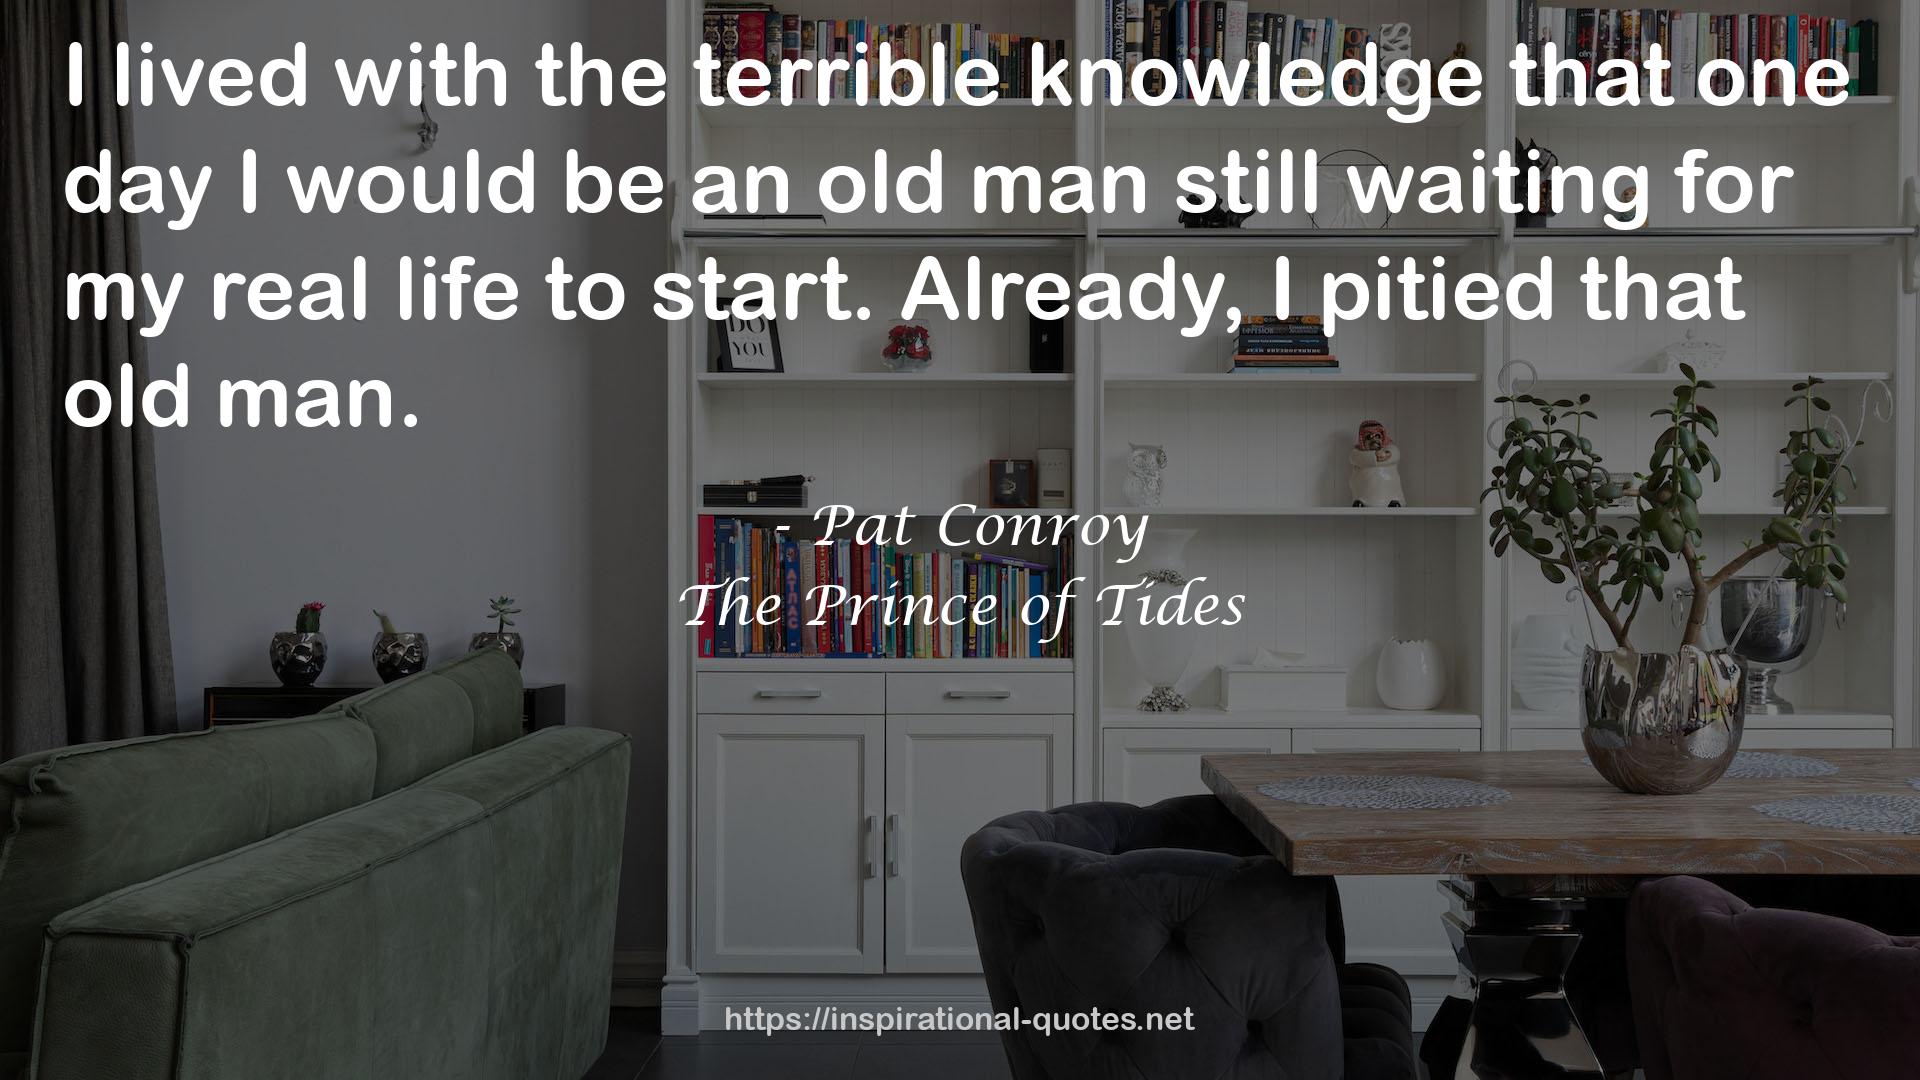 the terrible knowledge  QUOTES